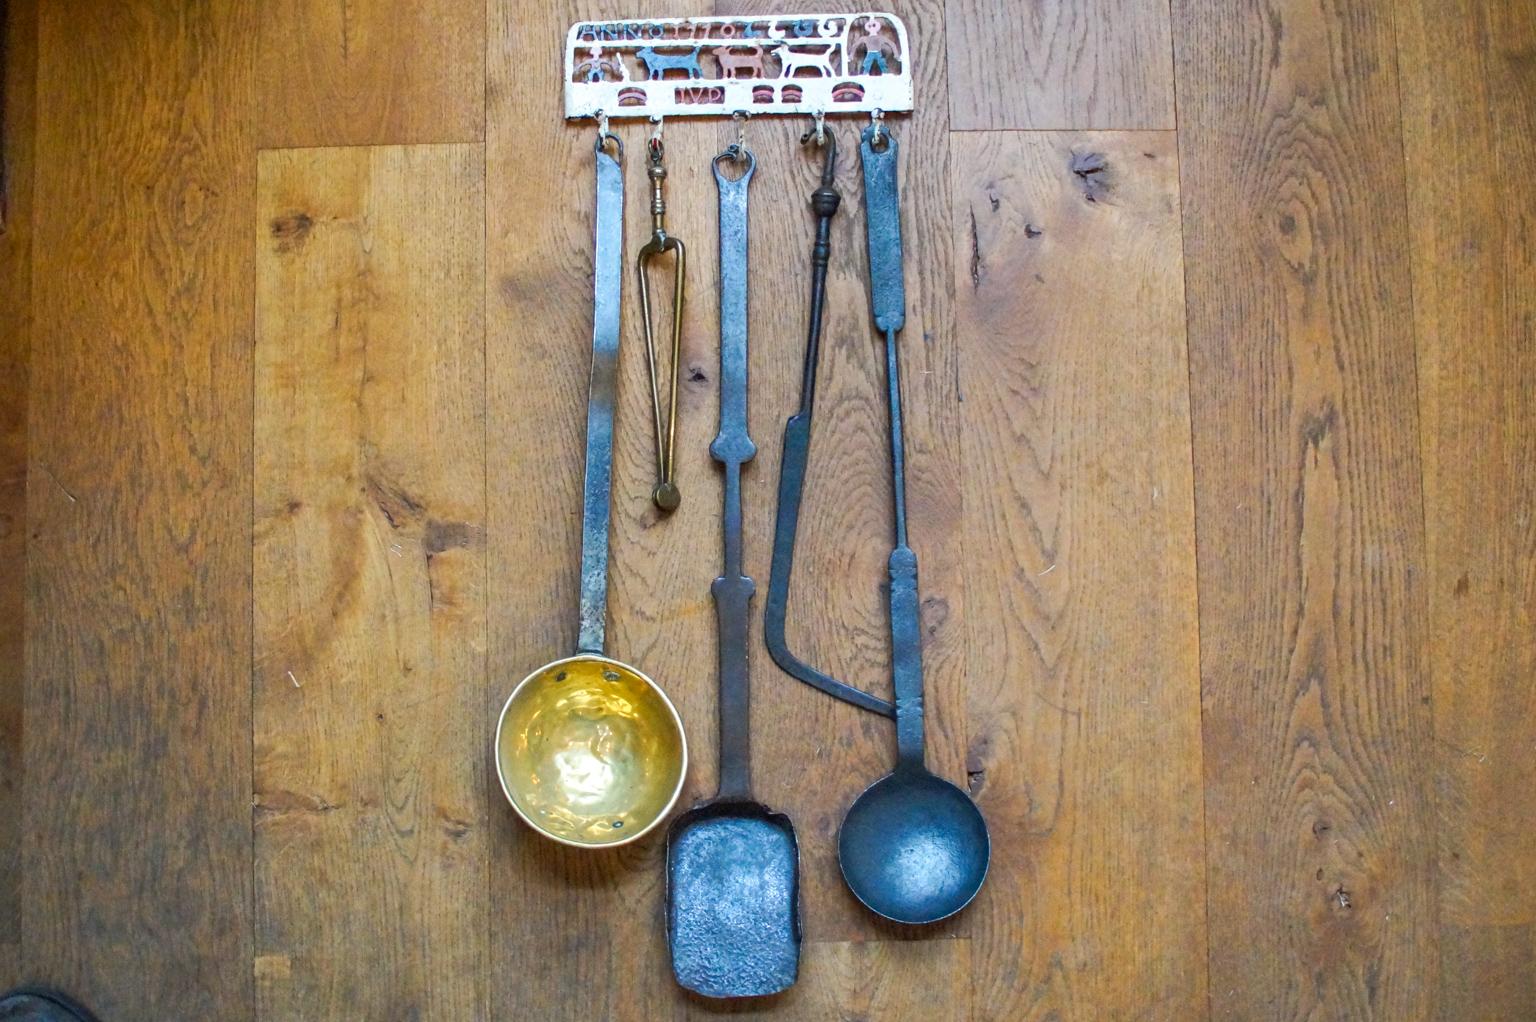 18th century Dutch Louis XV fireplace tool set consisting of a hanger and five fire irons and kitchen tools. From left to right is included a brass ladle with a wrought iron handle, brass tongs, a wrought iron small shovel, a wrought iron poker and